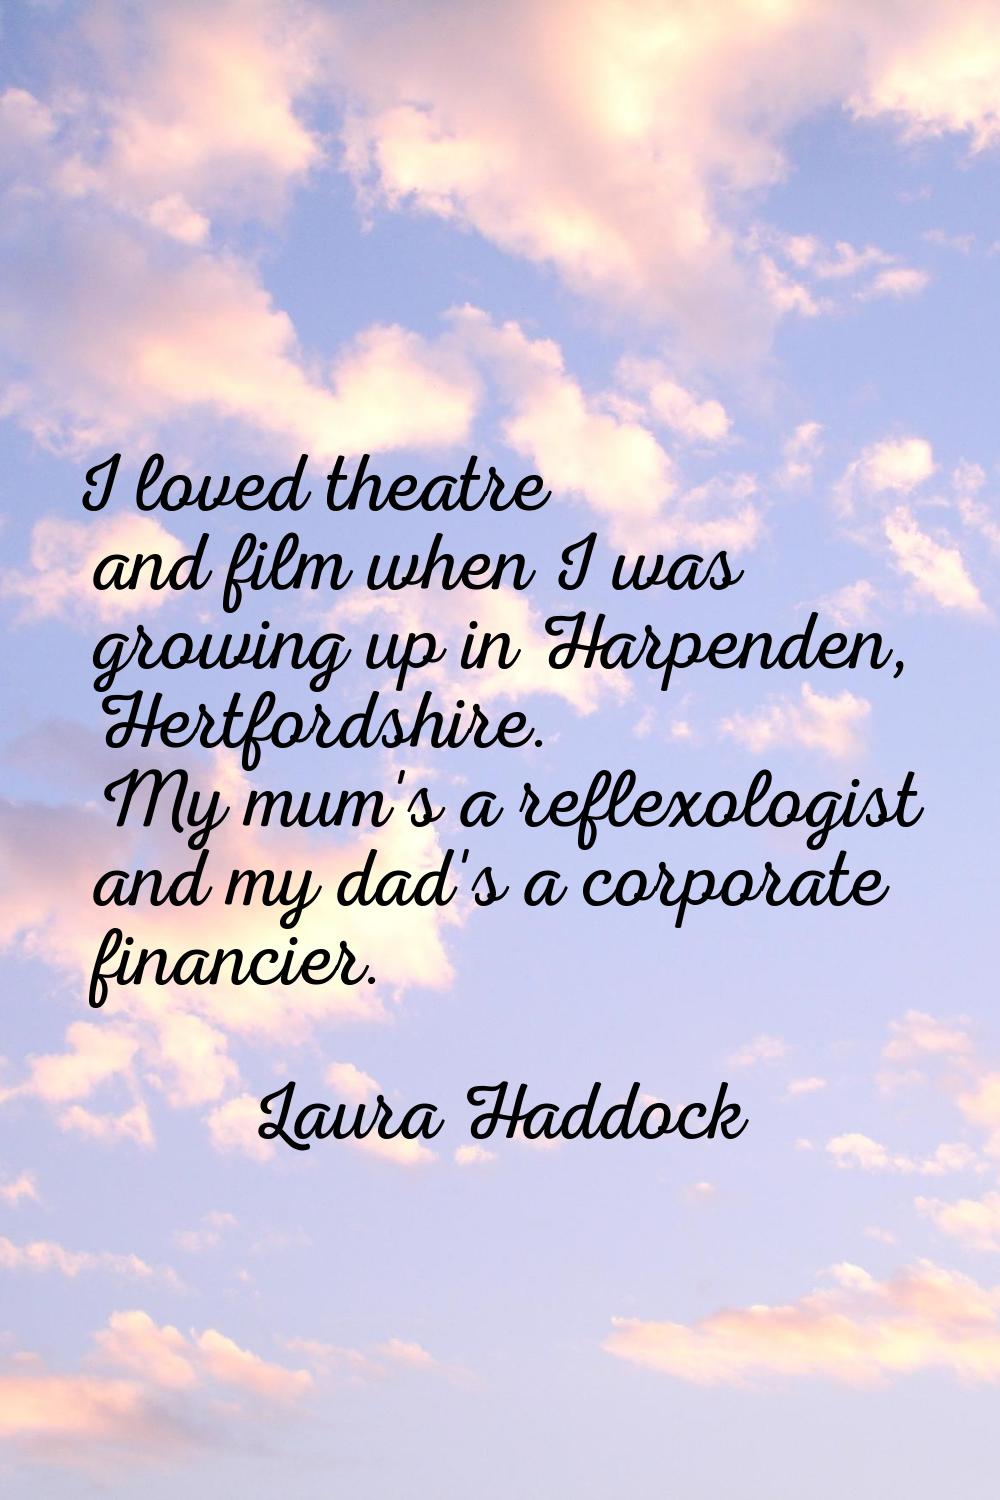 I loved theatre and film when I was growing up in Harpenden, Hertfordshire. My mum's a reflexologis